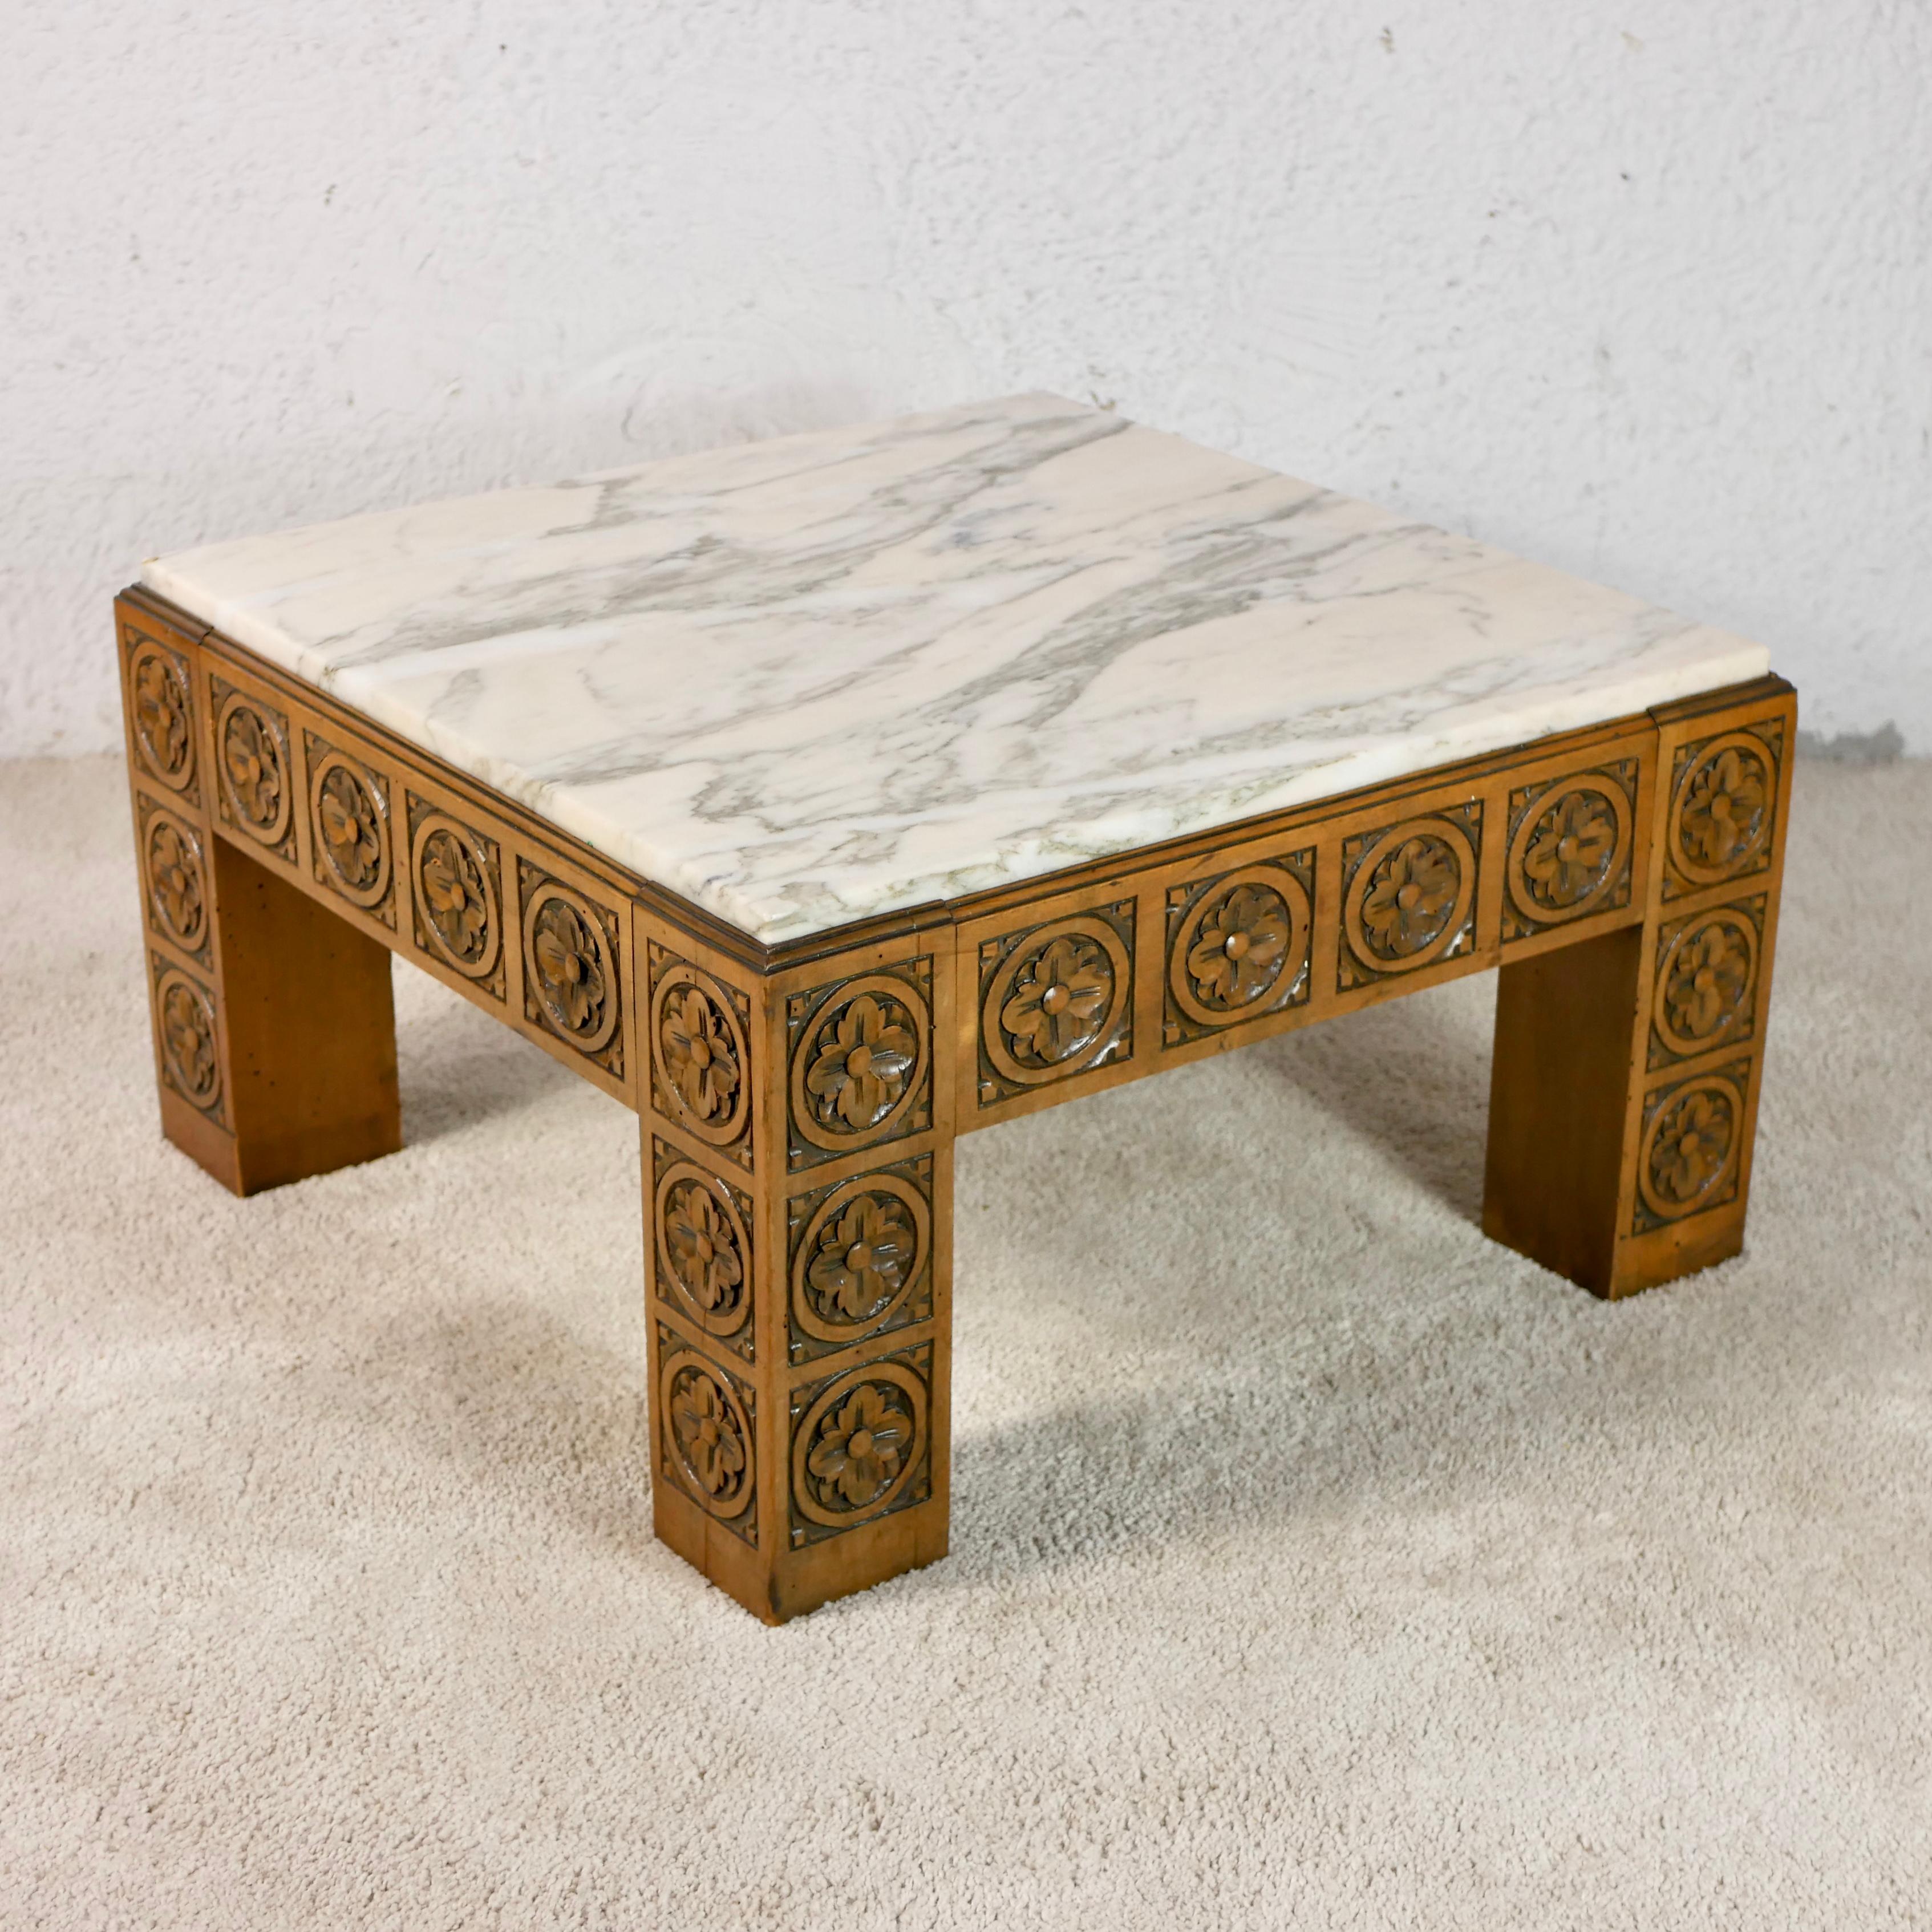 20th Century Midcentury Carved Wood and Marble Square Coffee Table from Spain